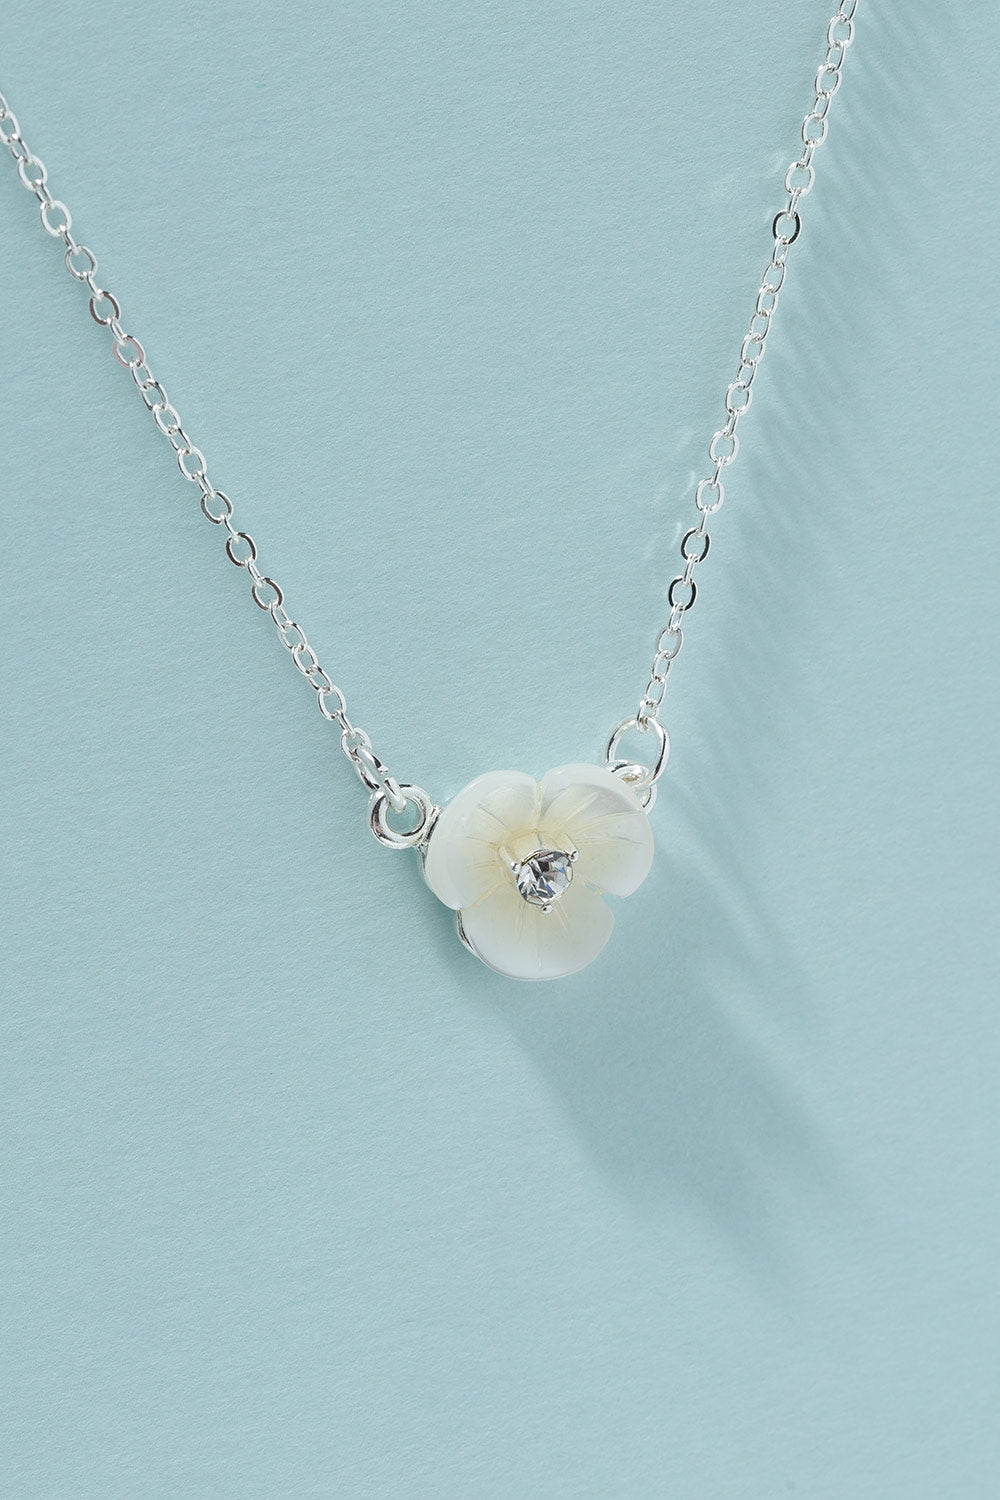 Type 2 Sego Lily Necklace